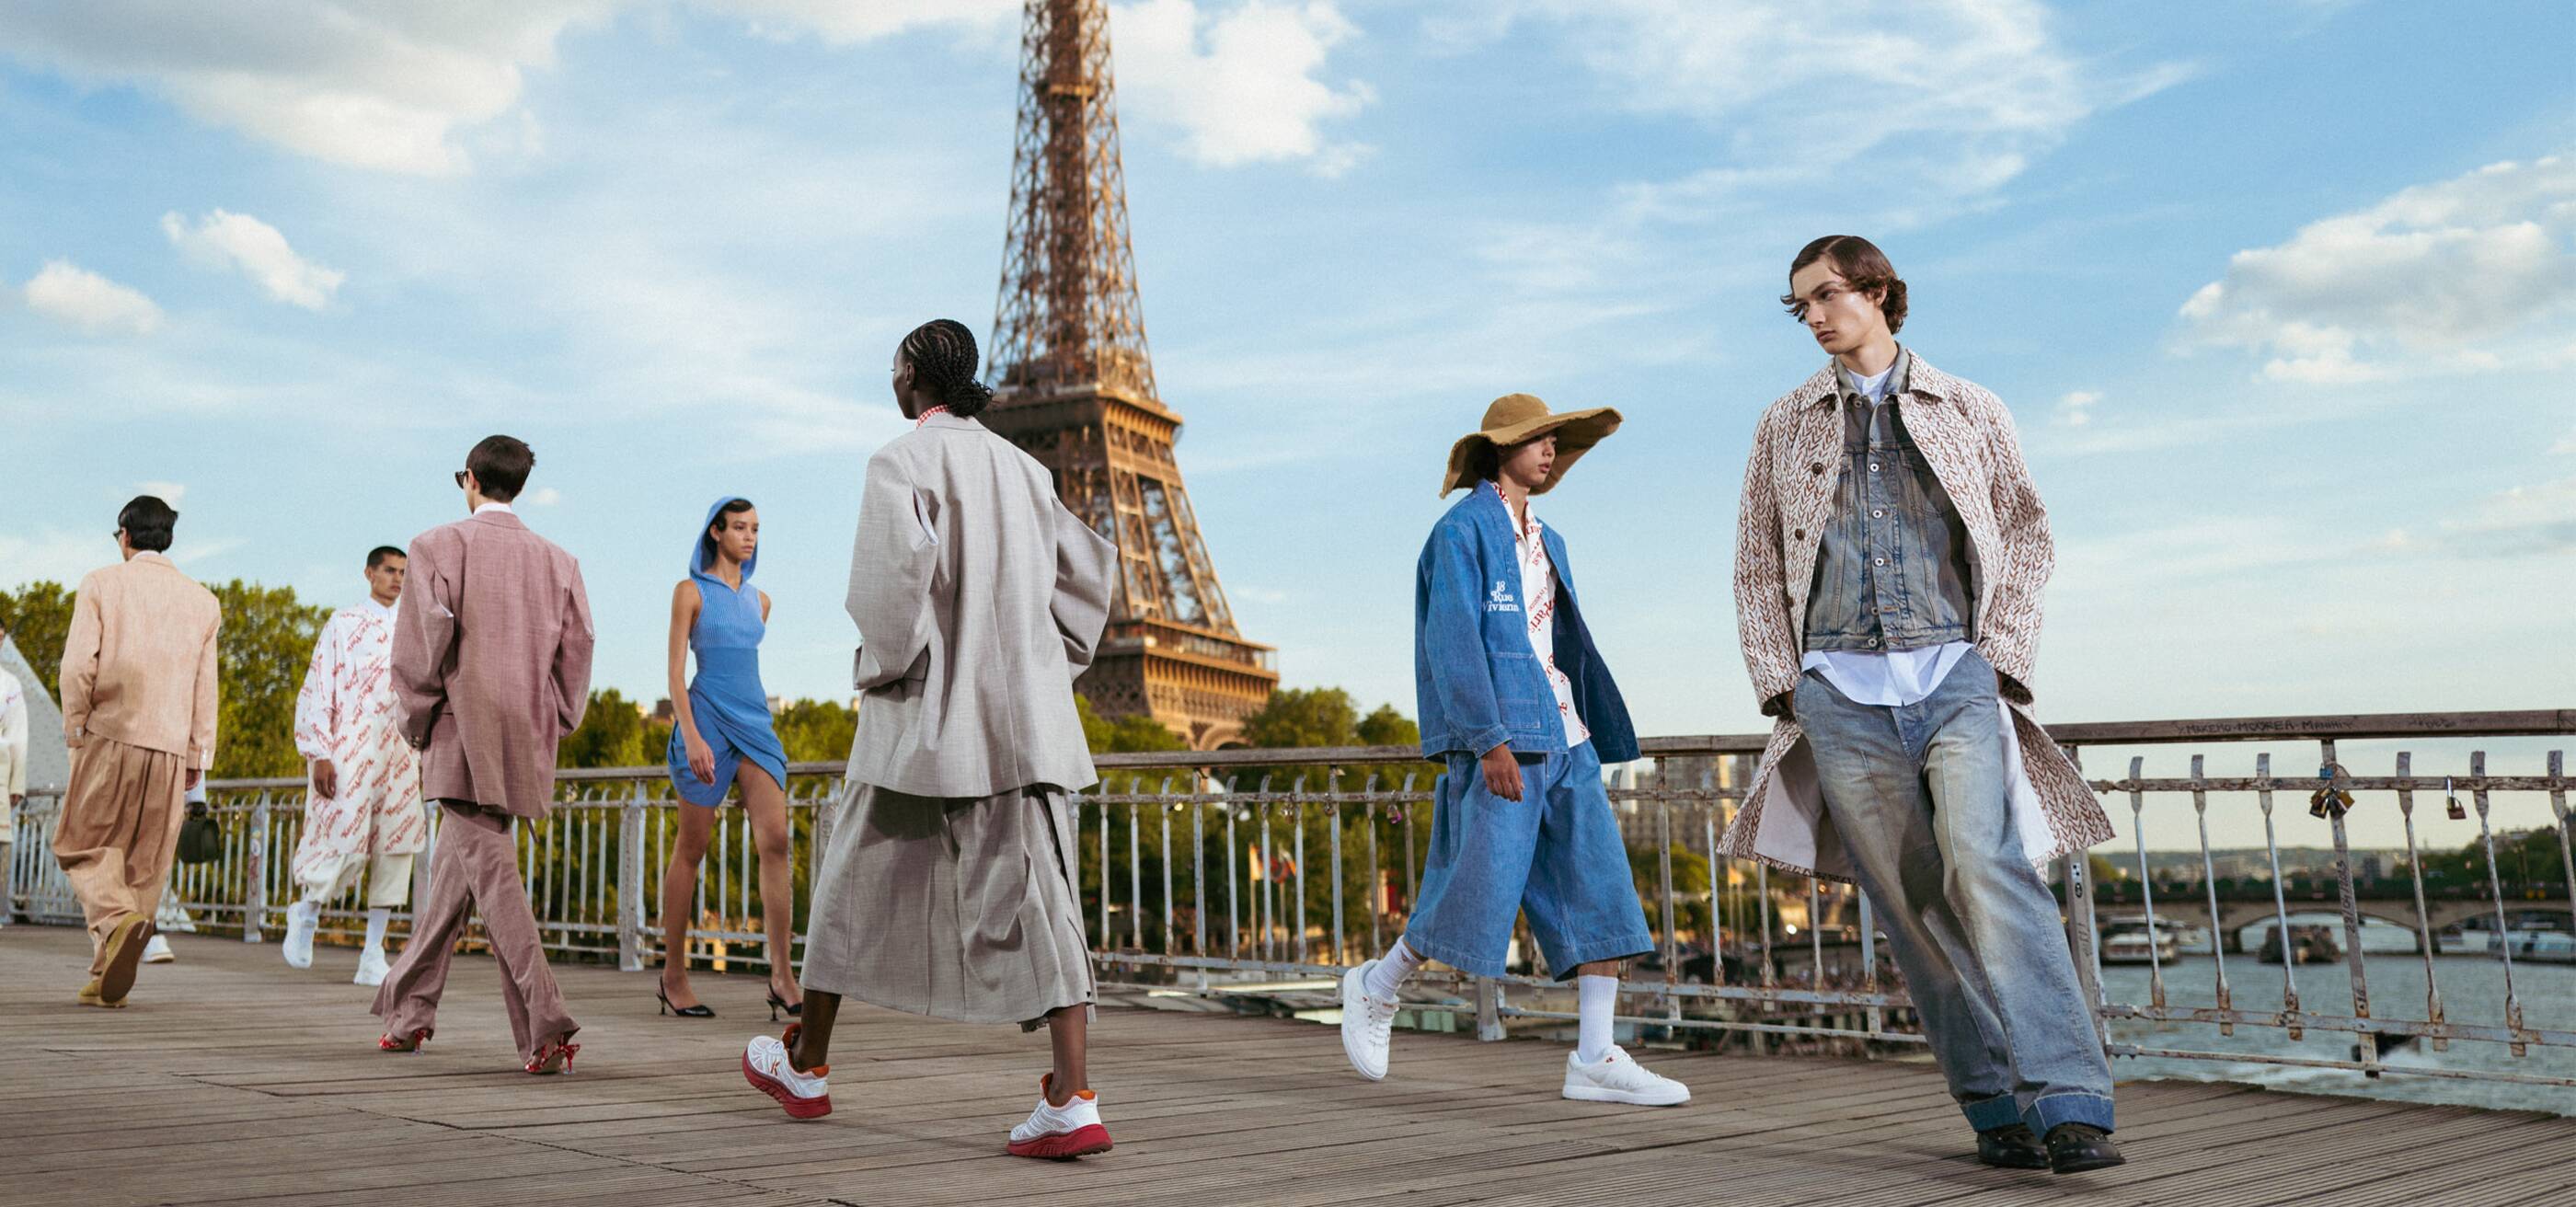 Master & Dynamic Continues Partnership With Louis Vuitton